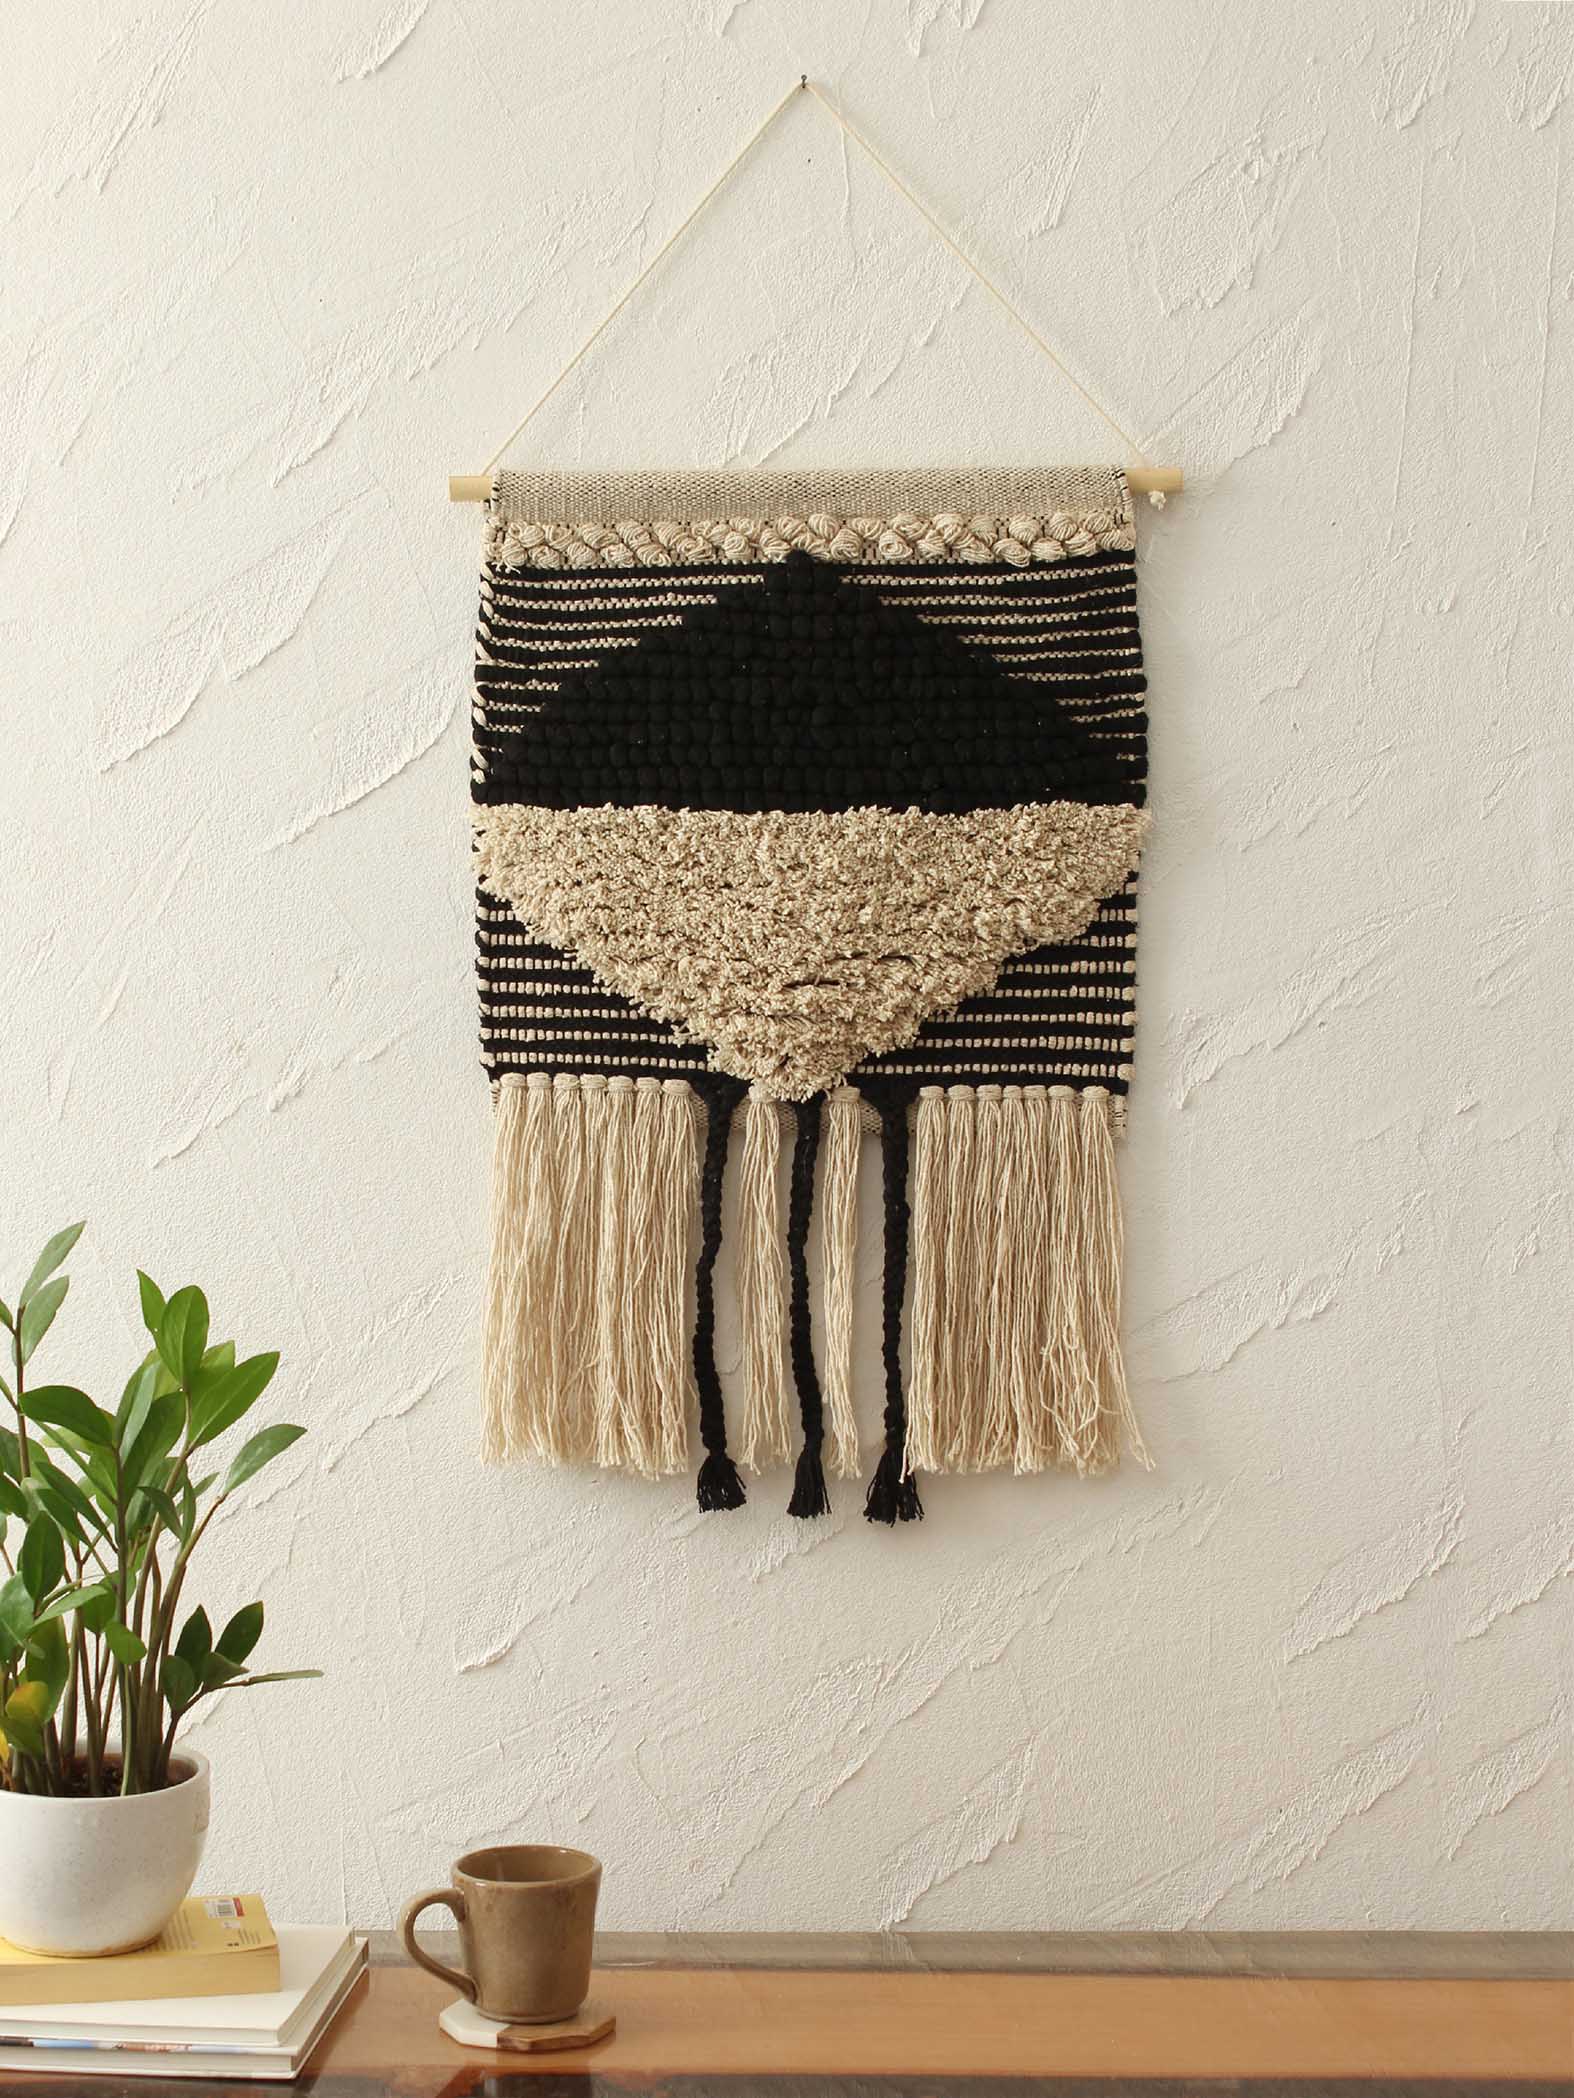 Kani Wall Hanging By House This